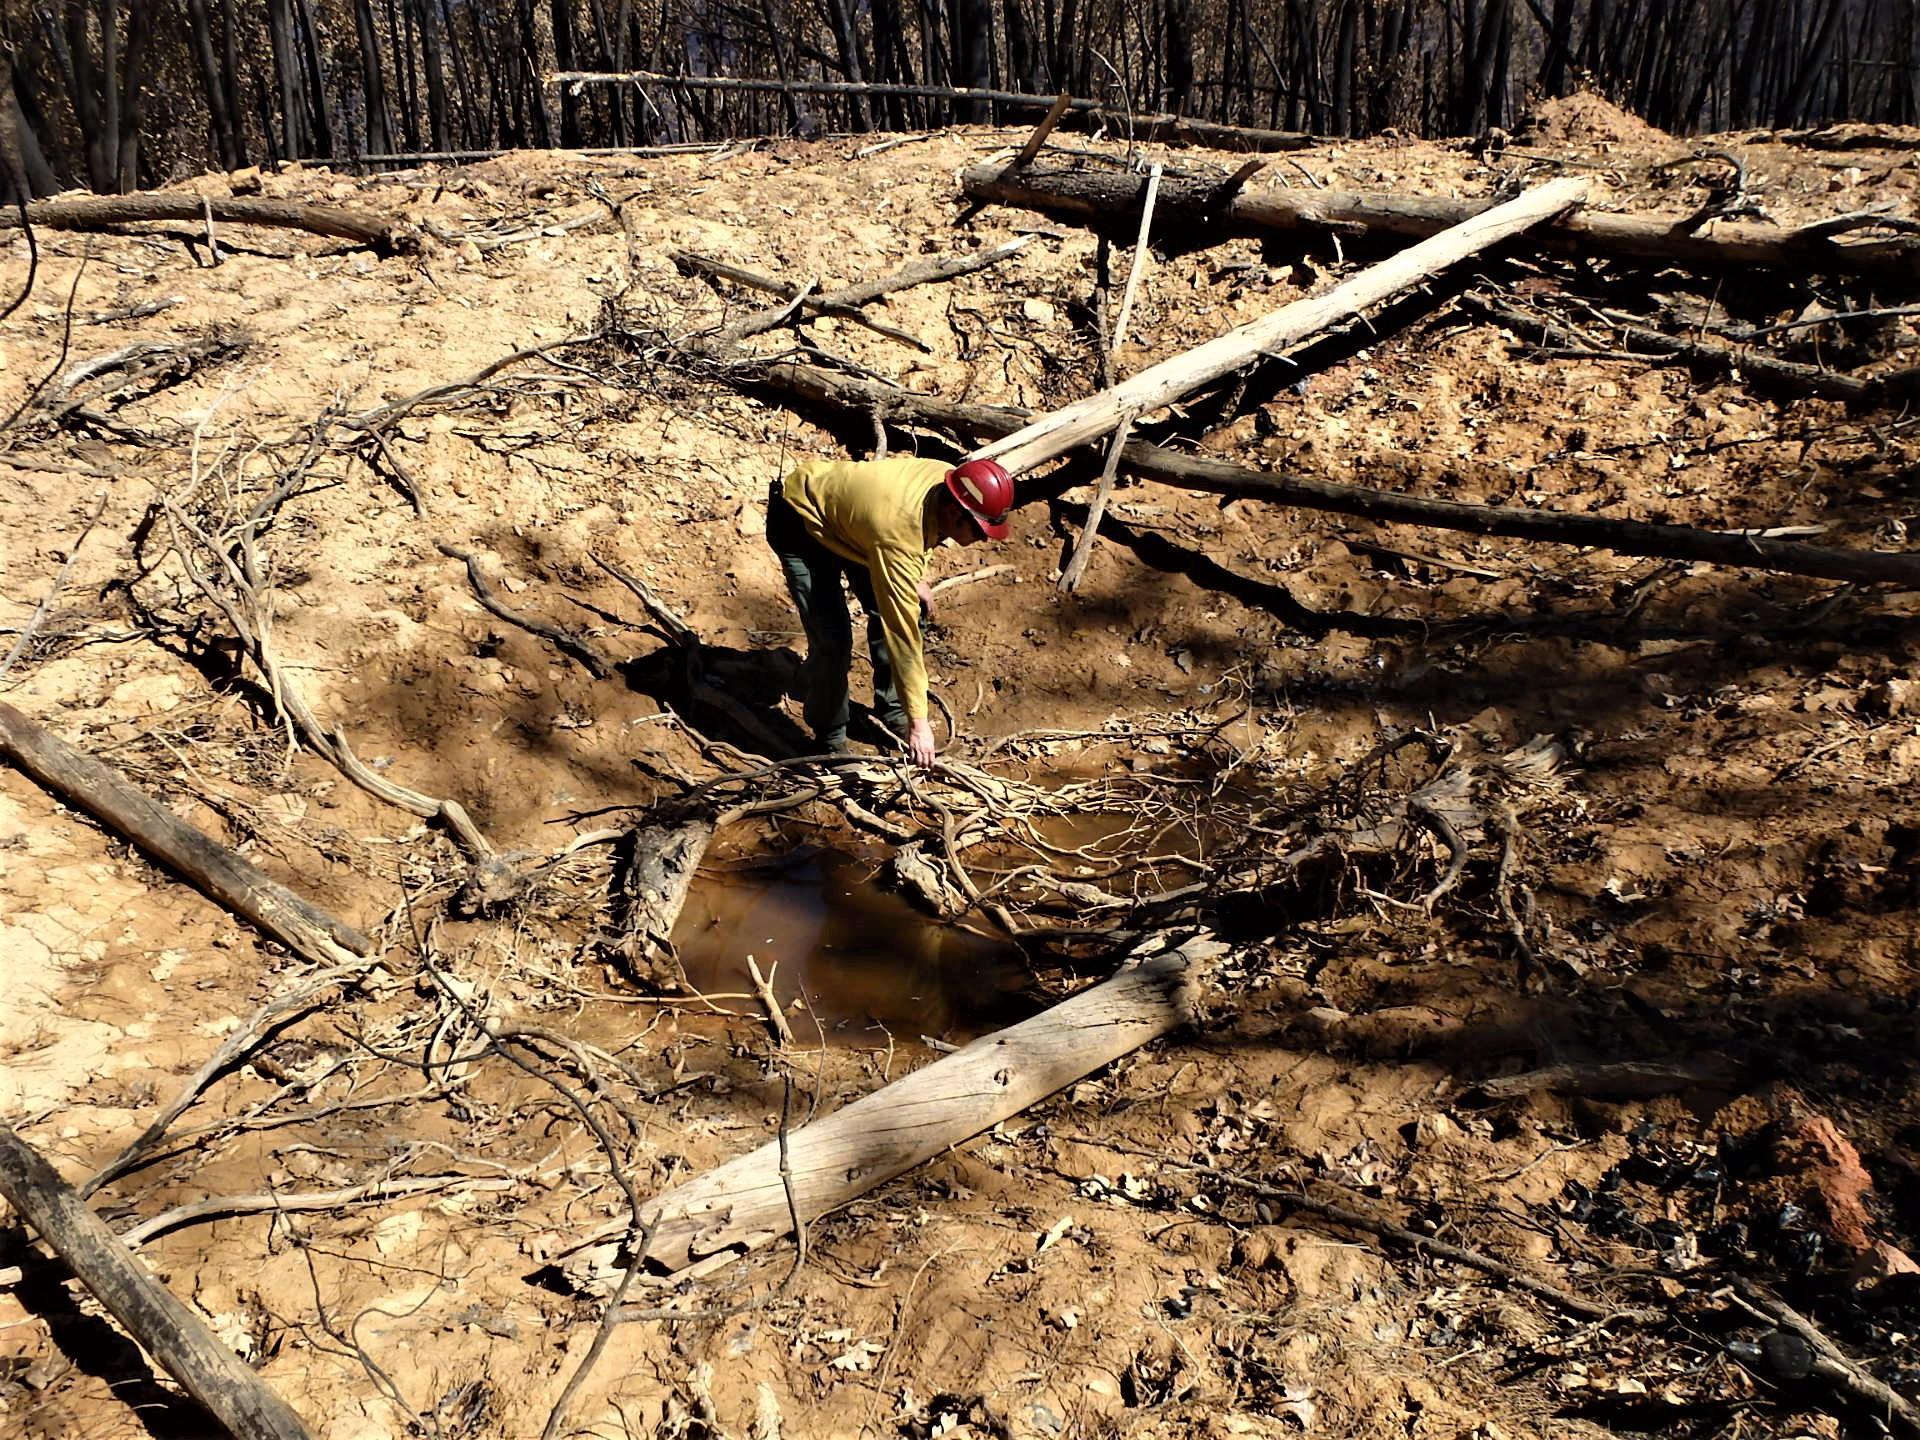 Image showing BAER Aquatics Biologist Dan Teater, Fisheries Biologist assessing California red legged frog critical habitat that was burned over by the Mosquito Fire